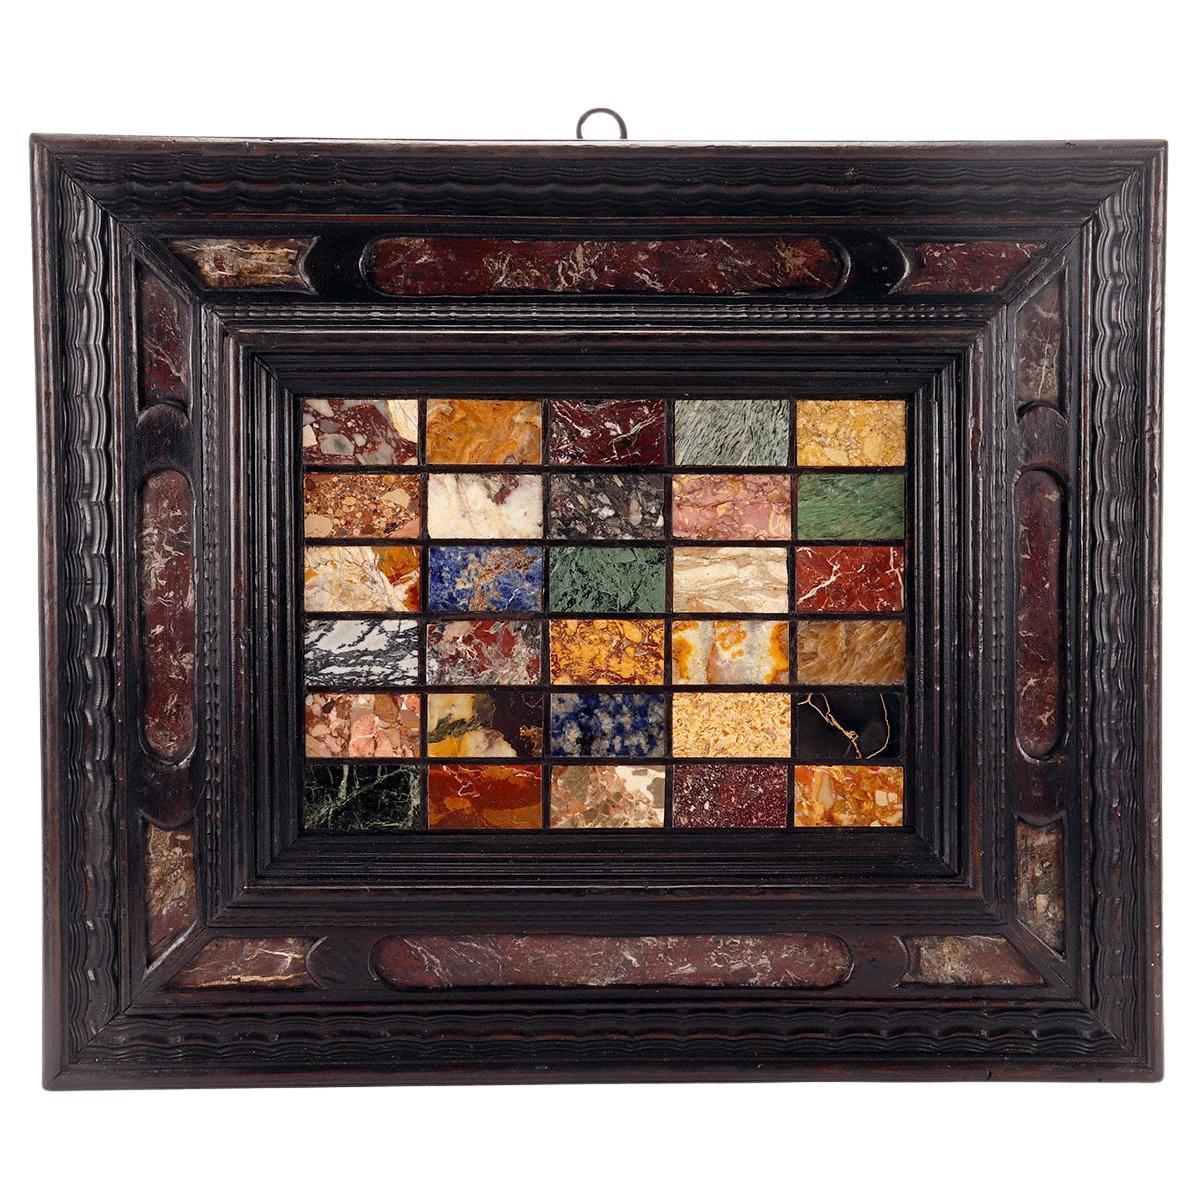 A selection of 30 antique Grand Tour marquetry marbles, Italy 1850. 